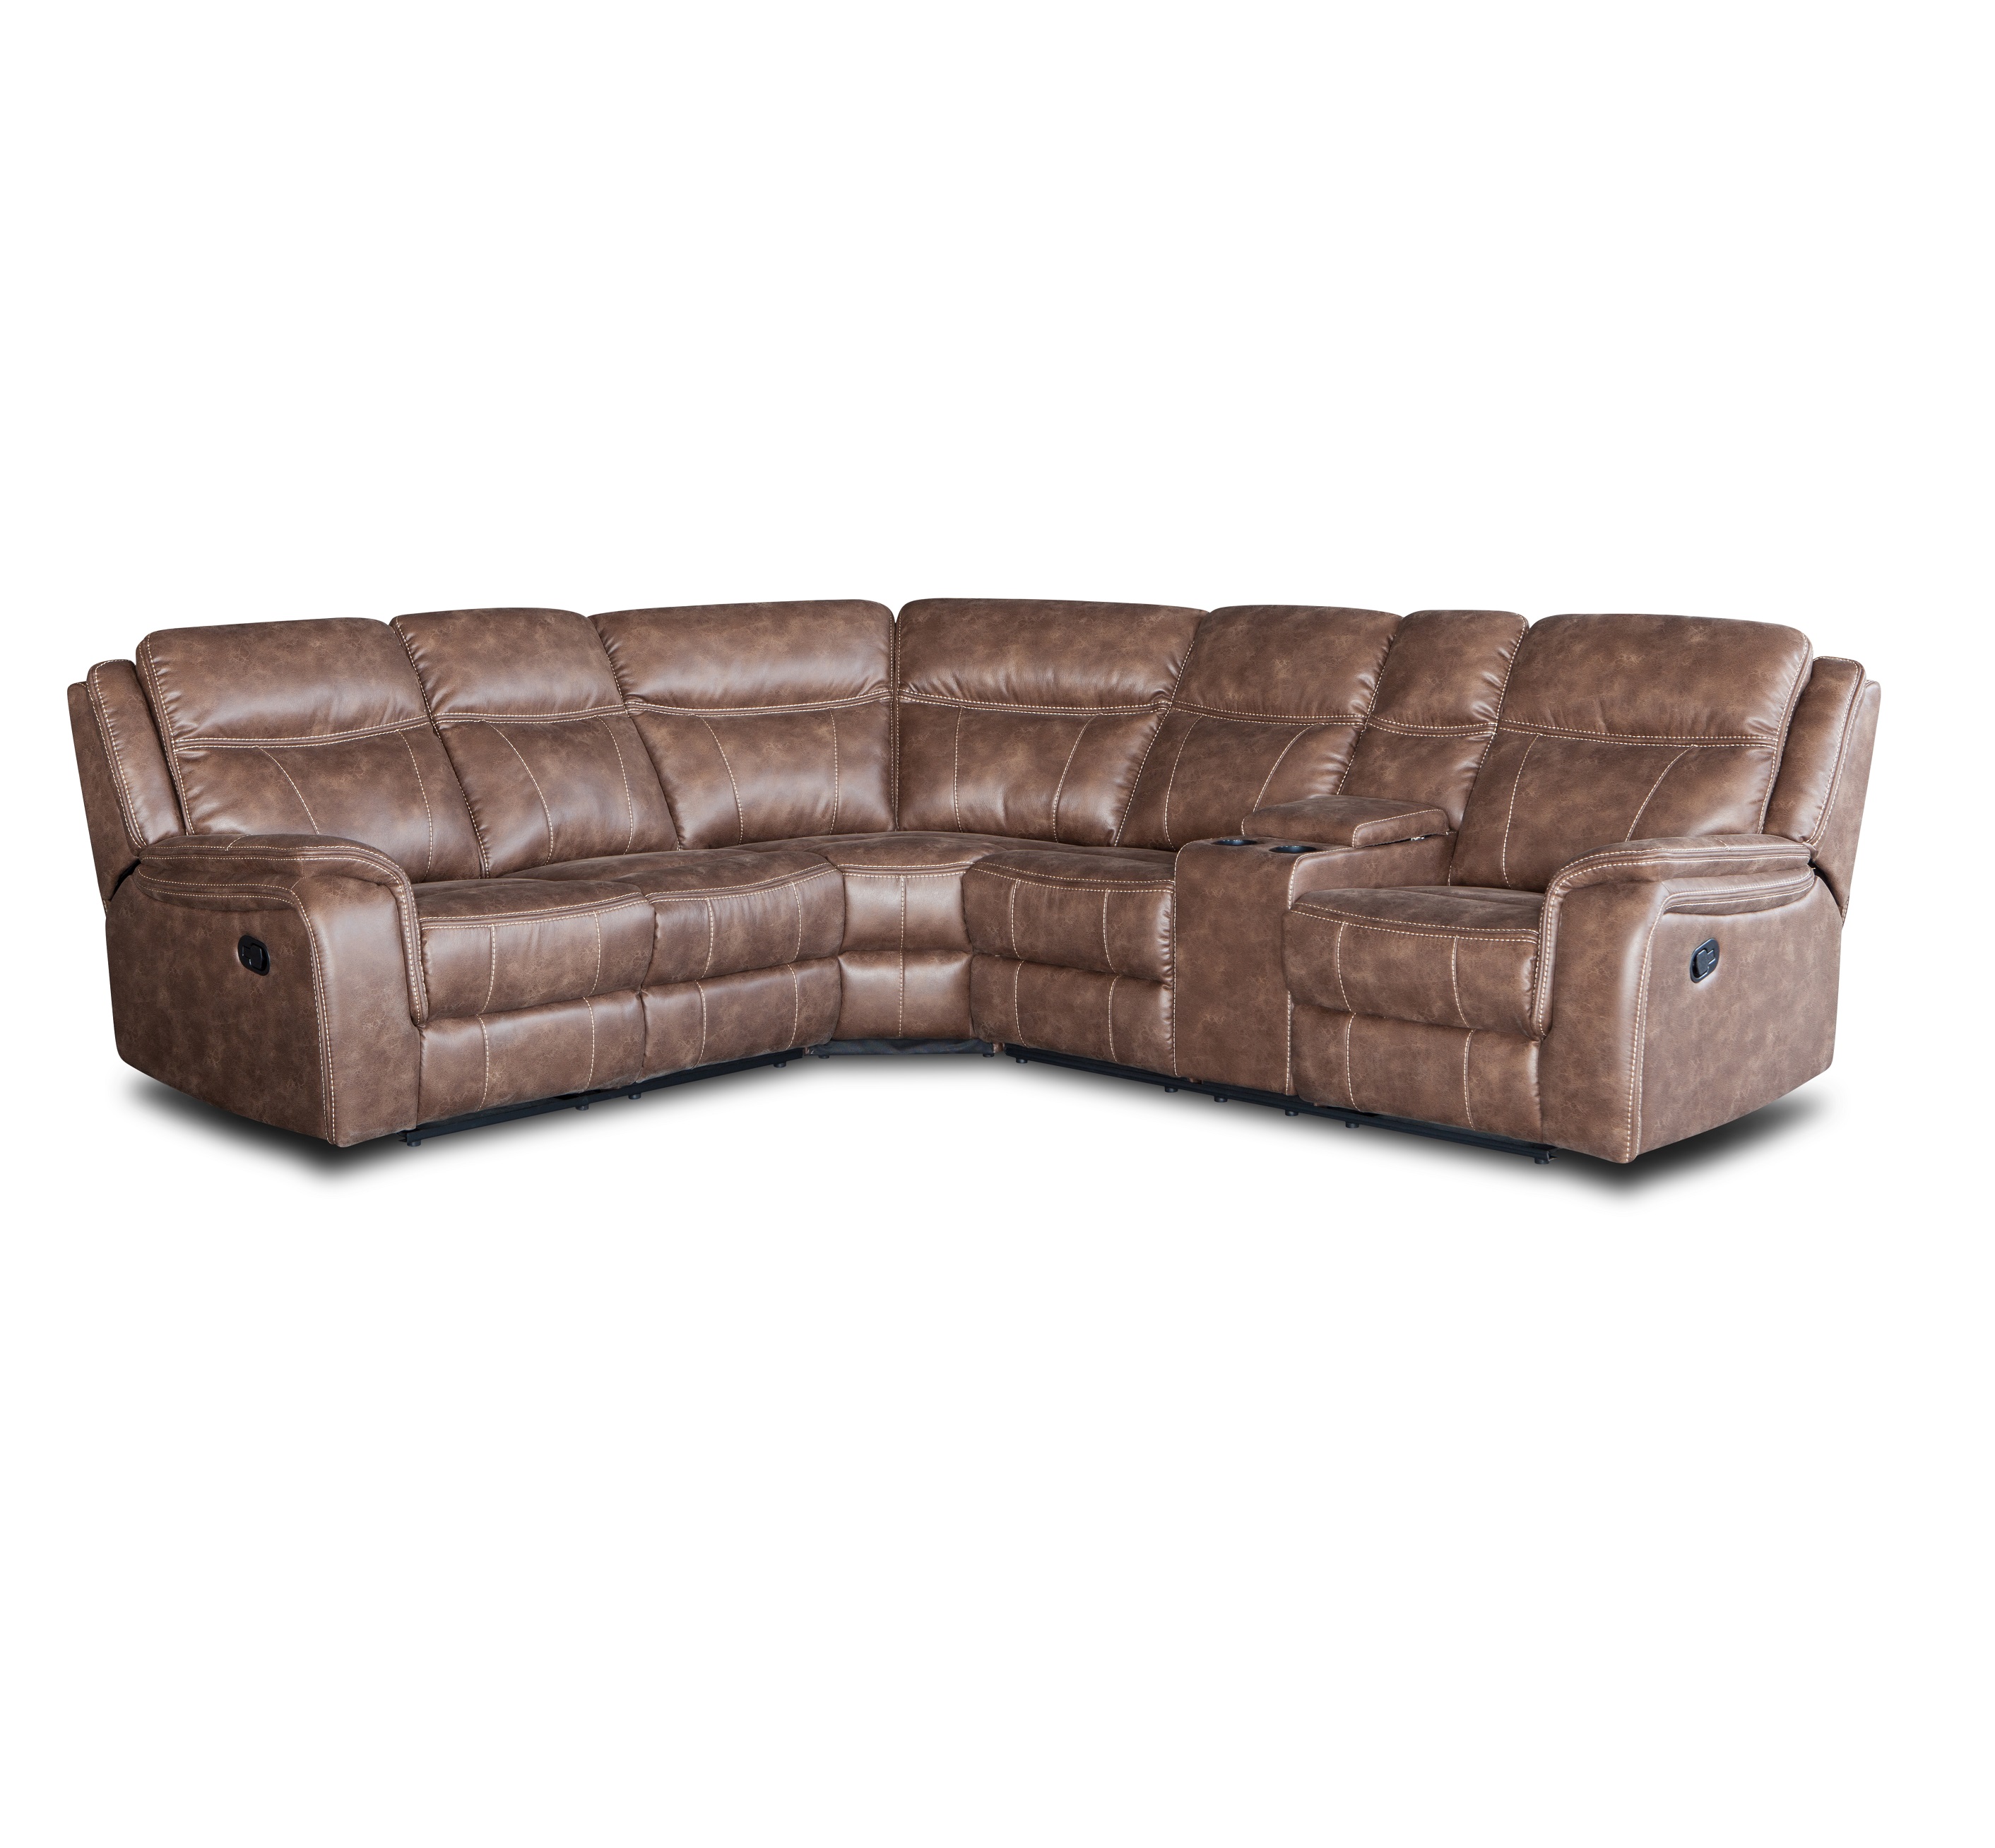 Functional 5 seat u shape brown leather recliner sofa with cup holder